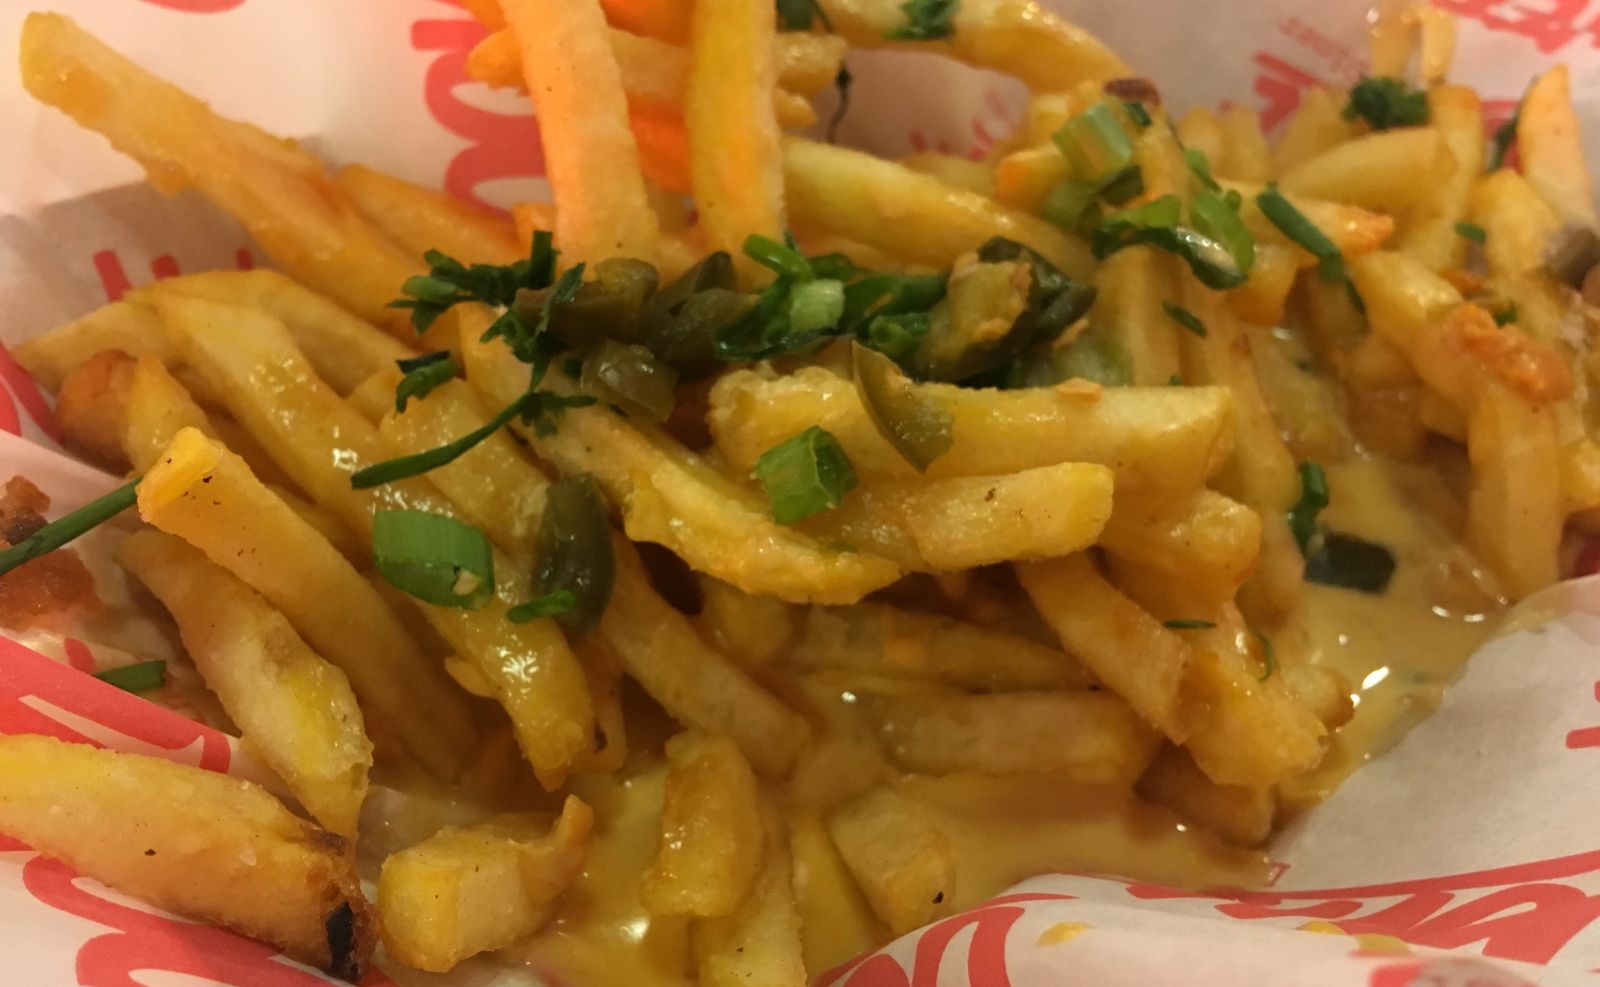 Jalapeno Cheese Fries at Oowee Diner North Street // Tuesday 18th June 2019